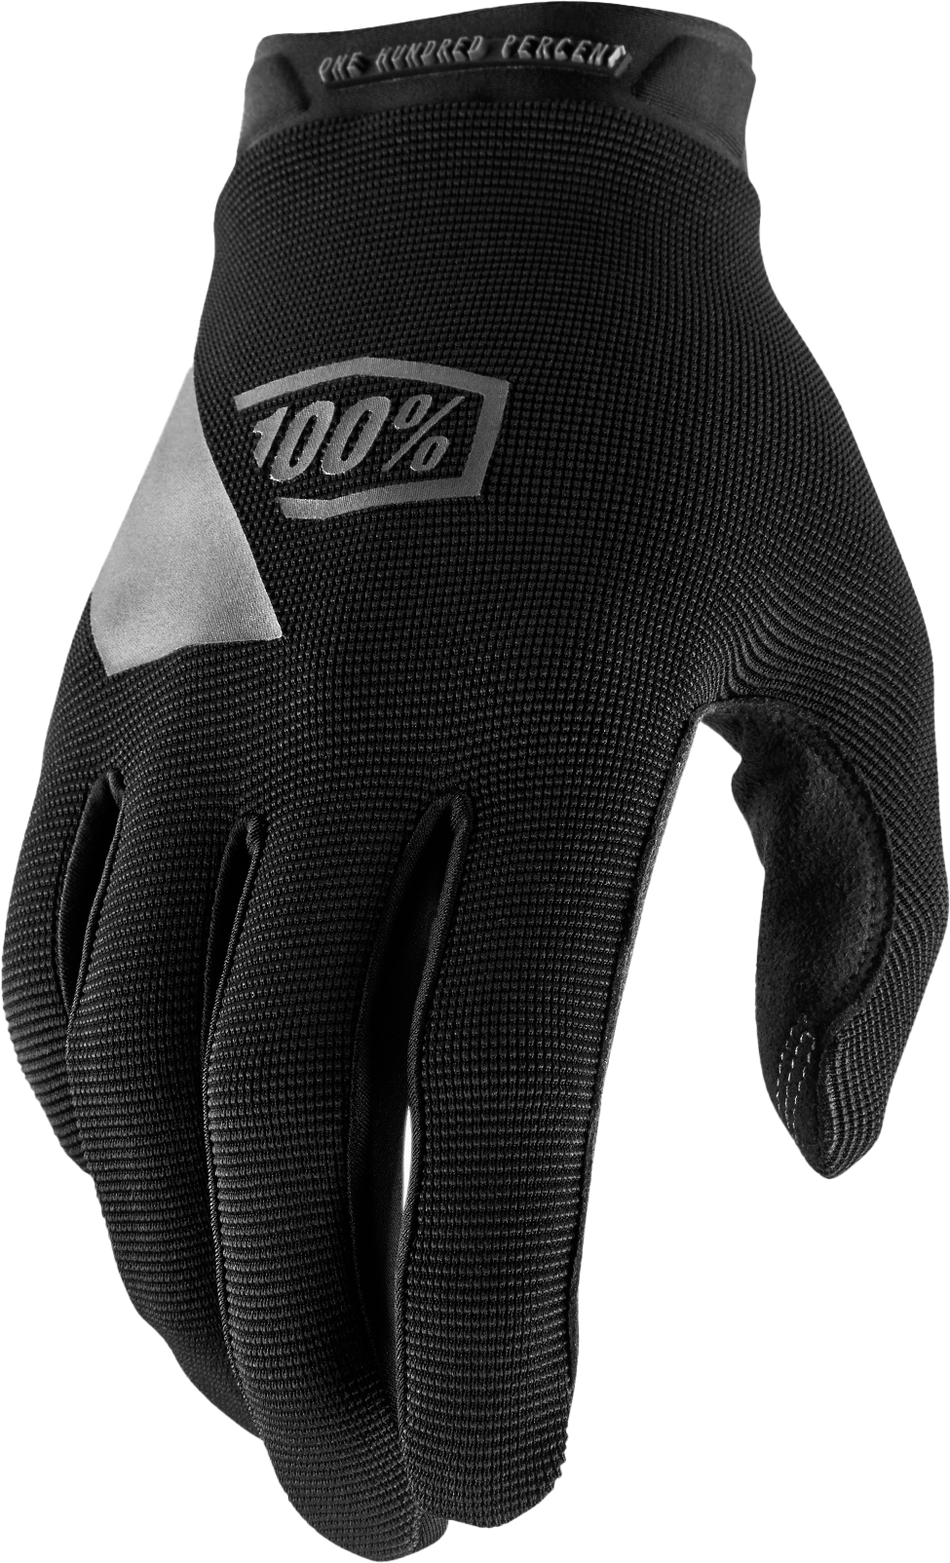 100% Ridecamp Youth Gloves Black Sm 10012-00000